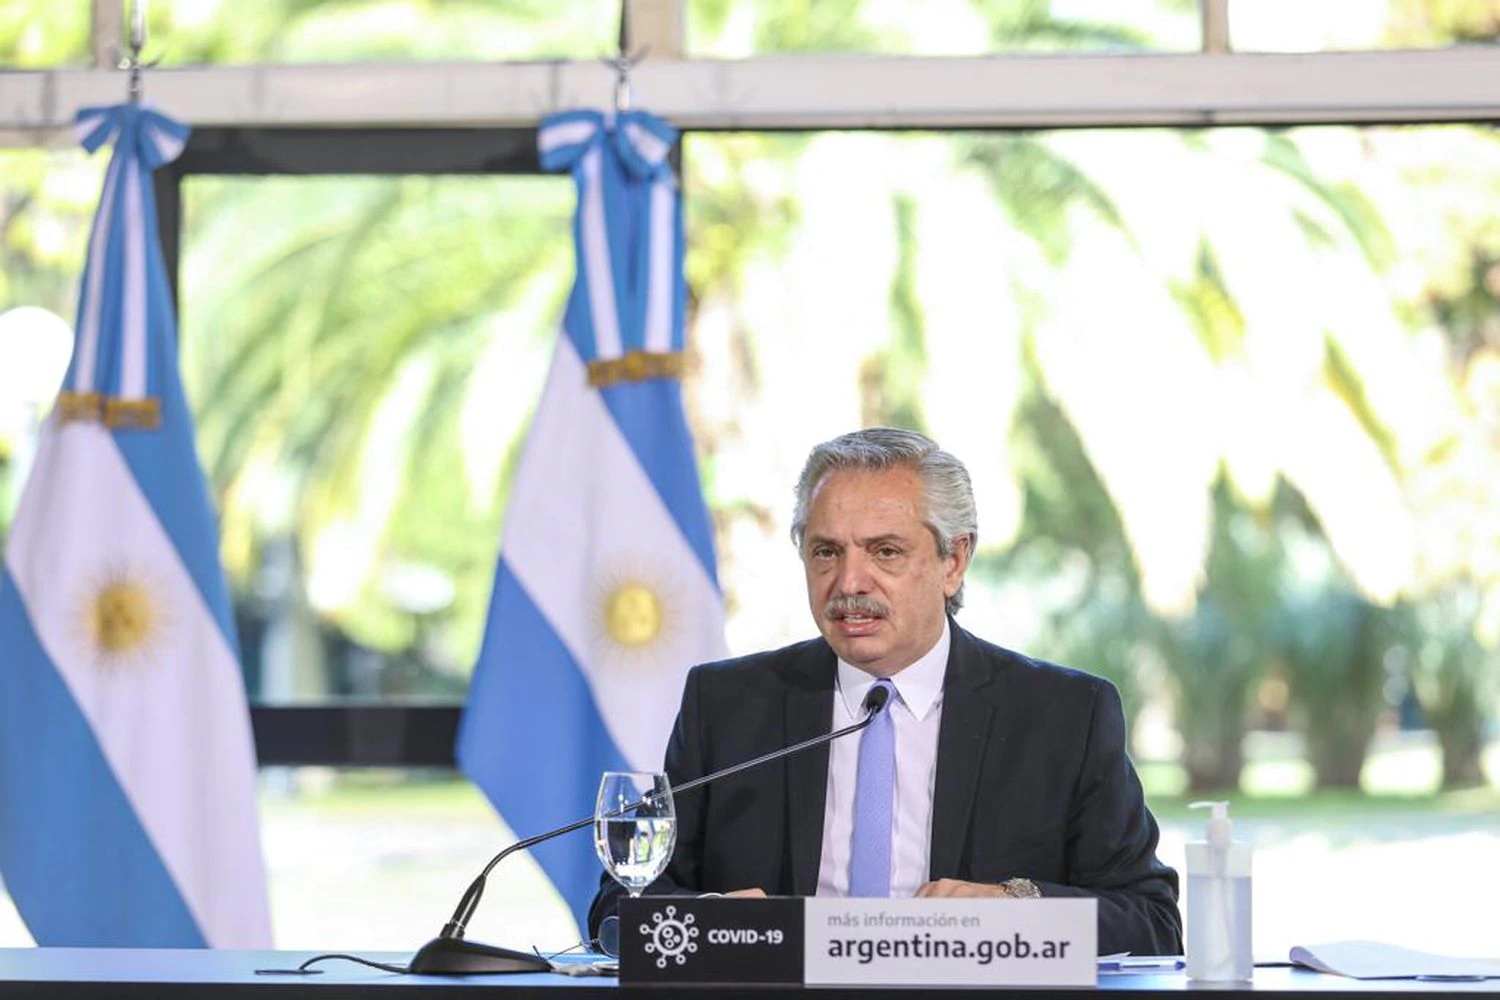 Argentine President Alberto Fernández announced on Wednesday in Buenos Aires that the two countries will produce up to 250 million doses of the experimental vaccine.